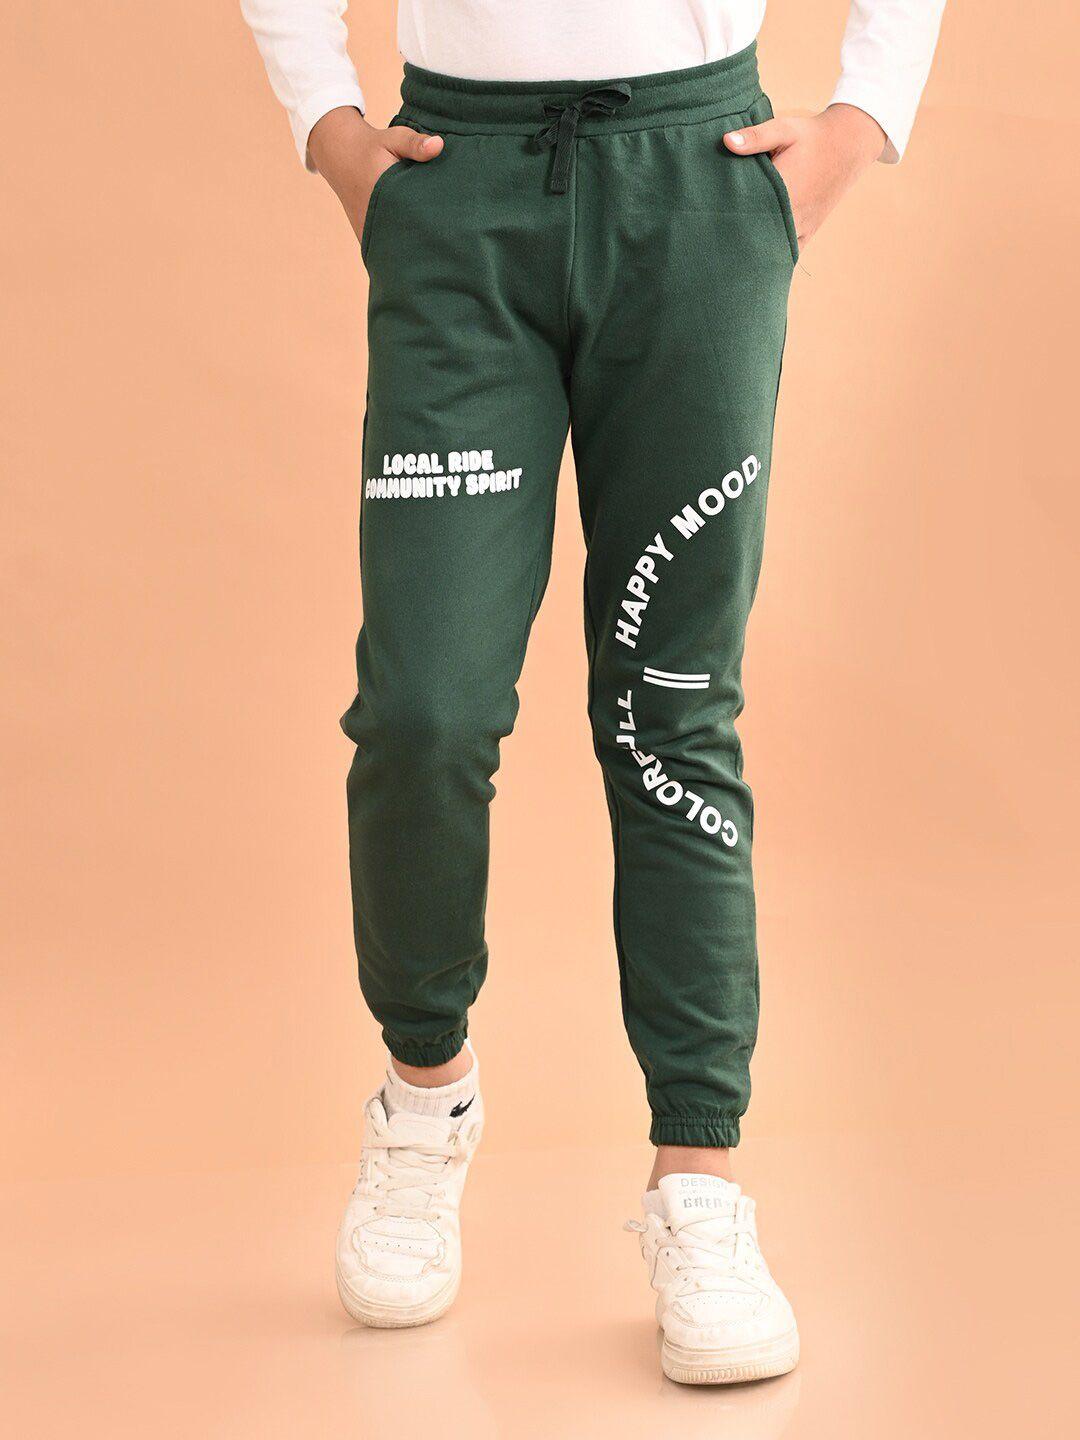 lilpicks boys mid-rise typography printed cotton joggers